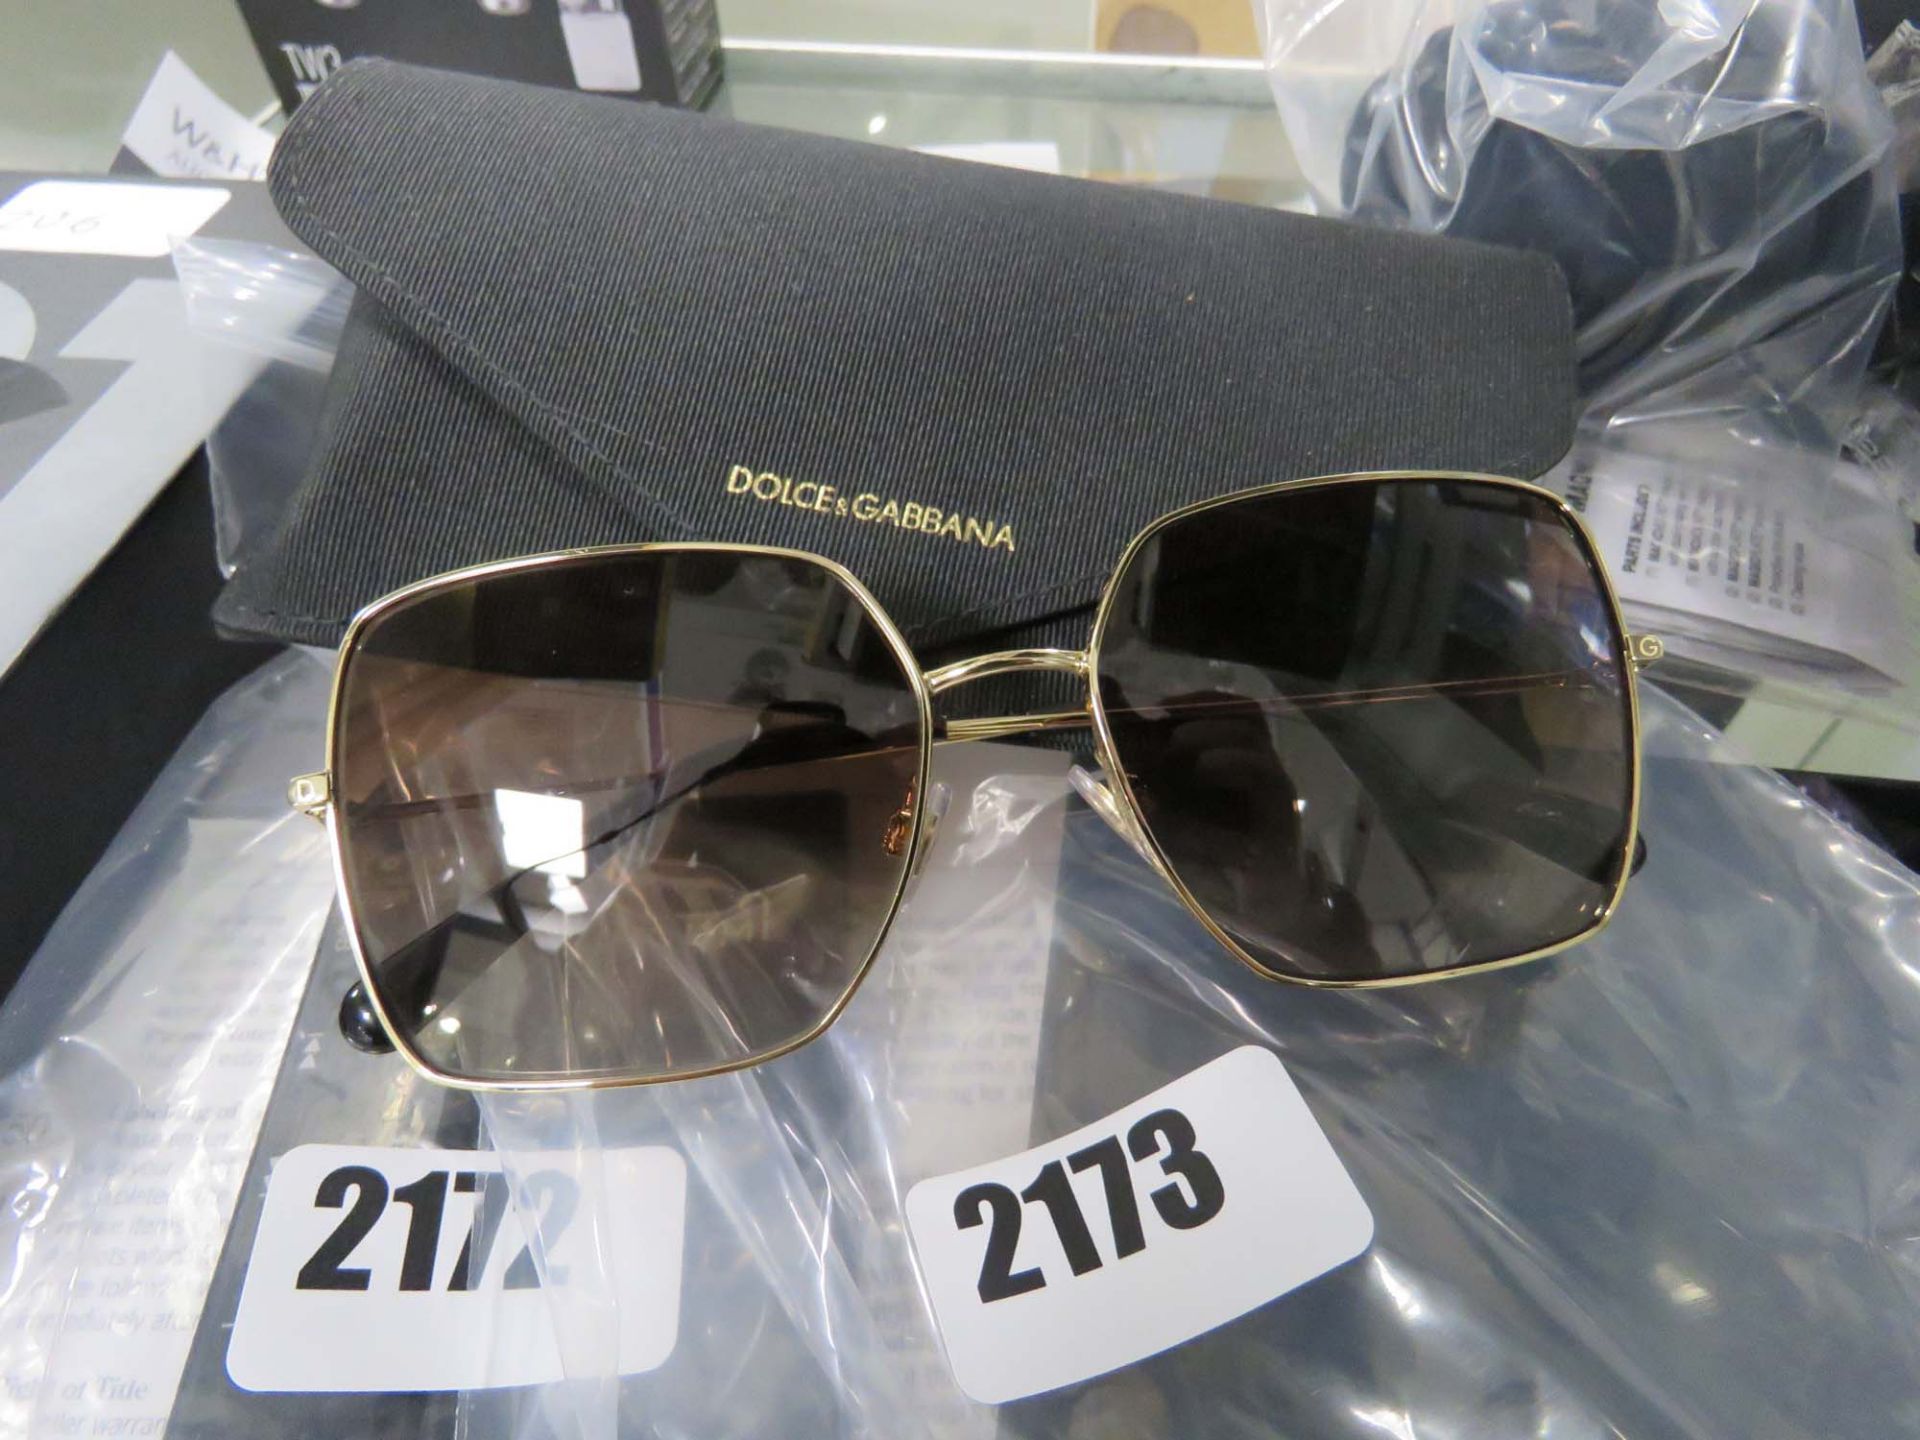 Pair of D & G sunglasses with carry case